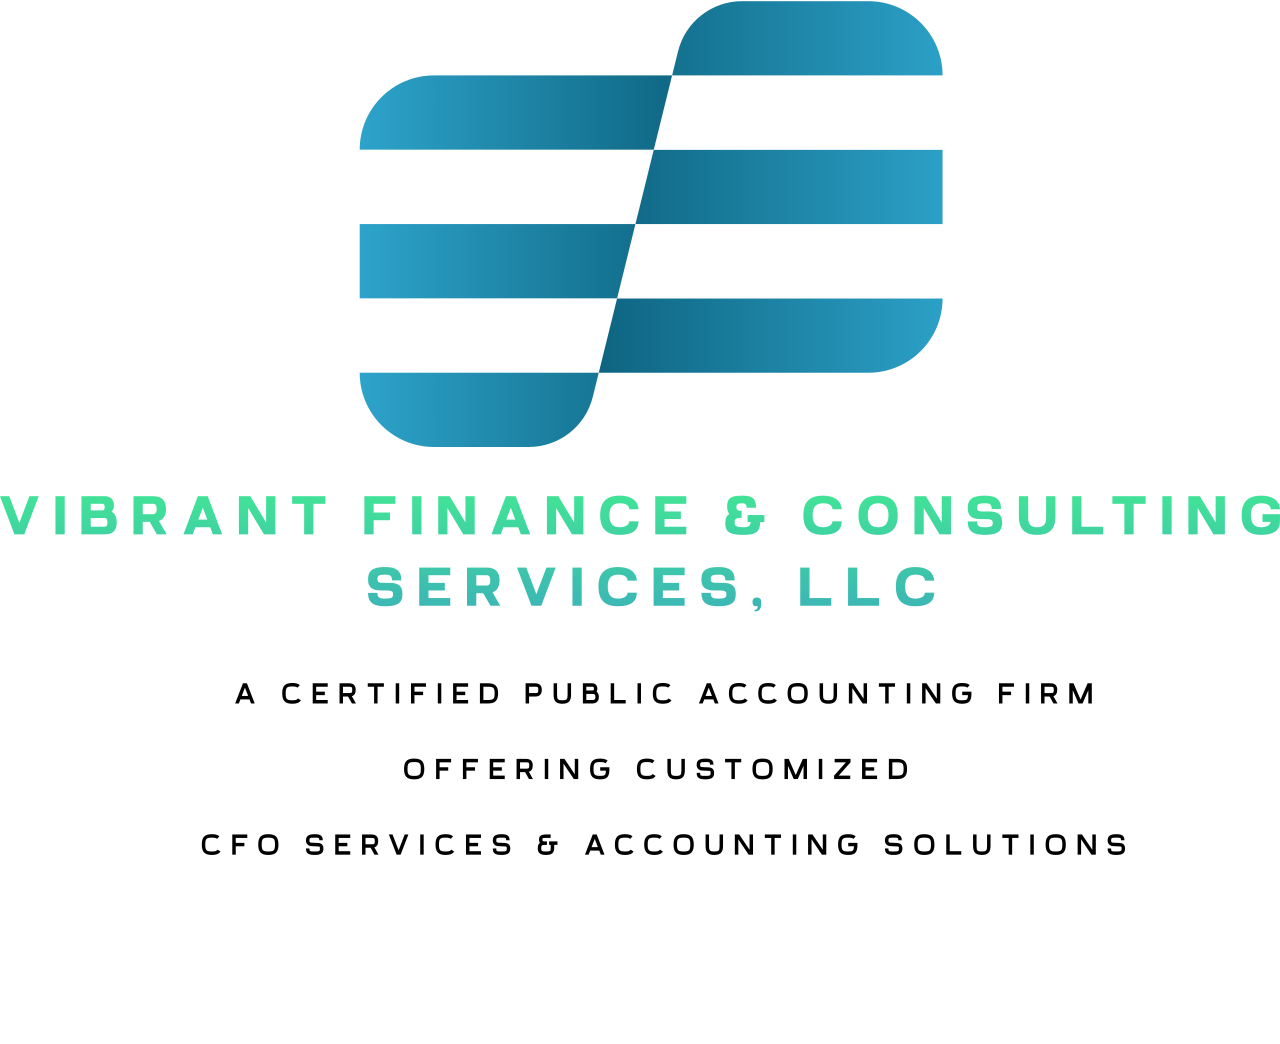 Vibrant Finance & Consulting 
Services, LLC's logo